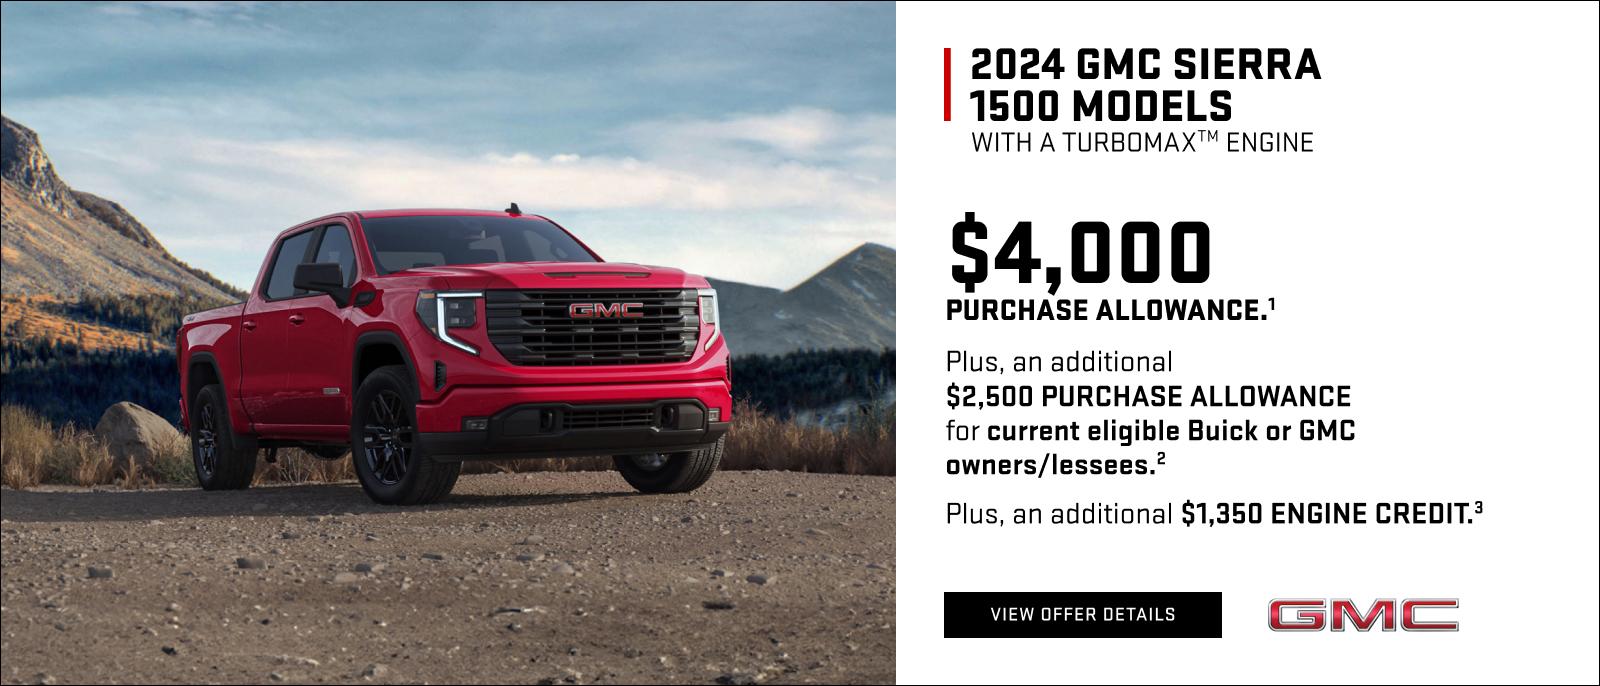 $4,000 PURCHASE ALLOWANCE.1

Plus, an additional $2,500 PURCHASE ALLOWANCE for current eligible Buick or GMC owners/lessees.2

Plus, an additional $1,350 ENGINE CREDIT.3